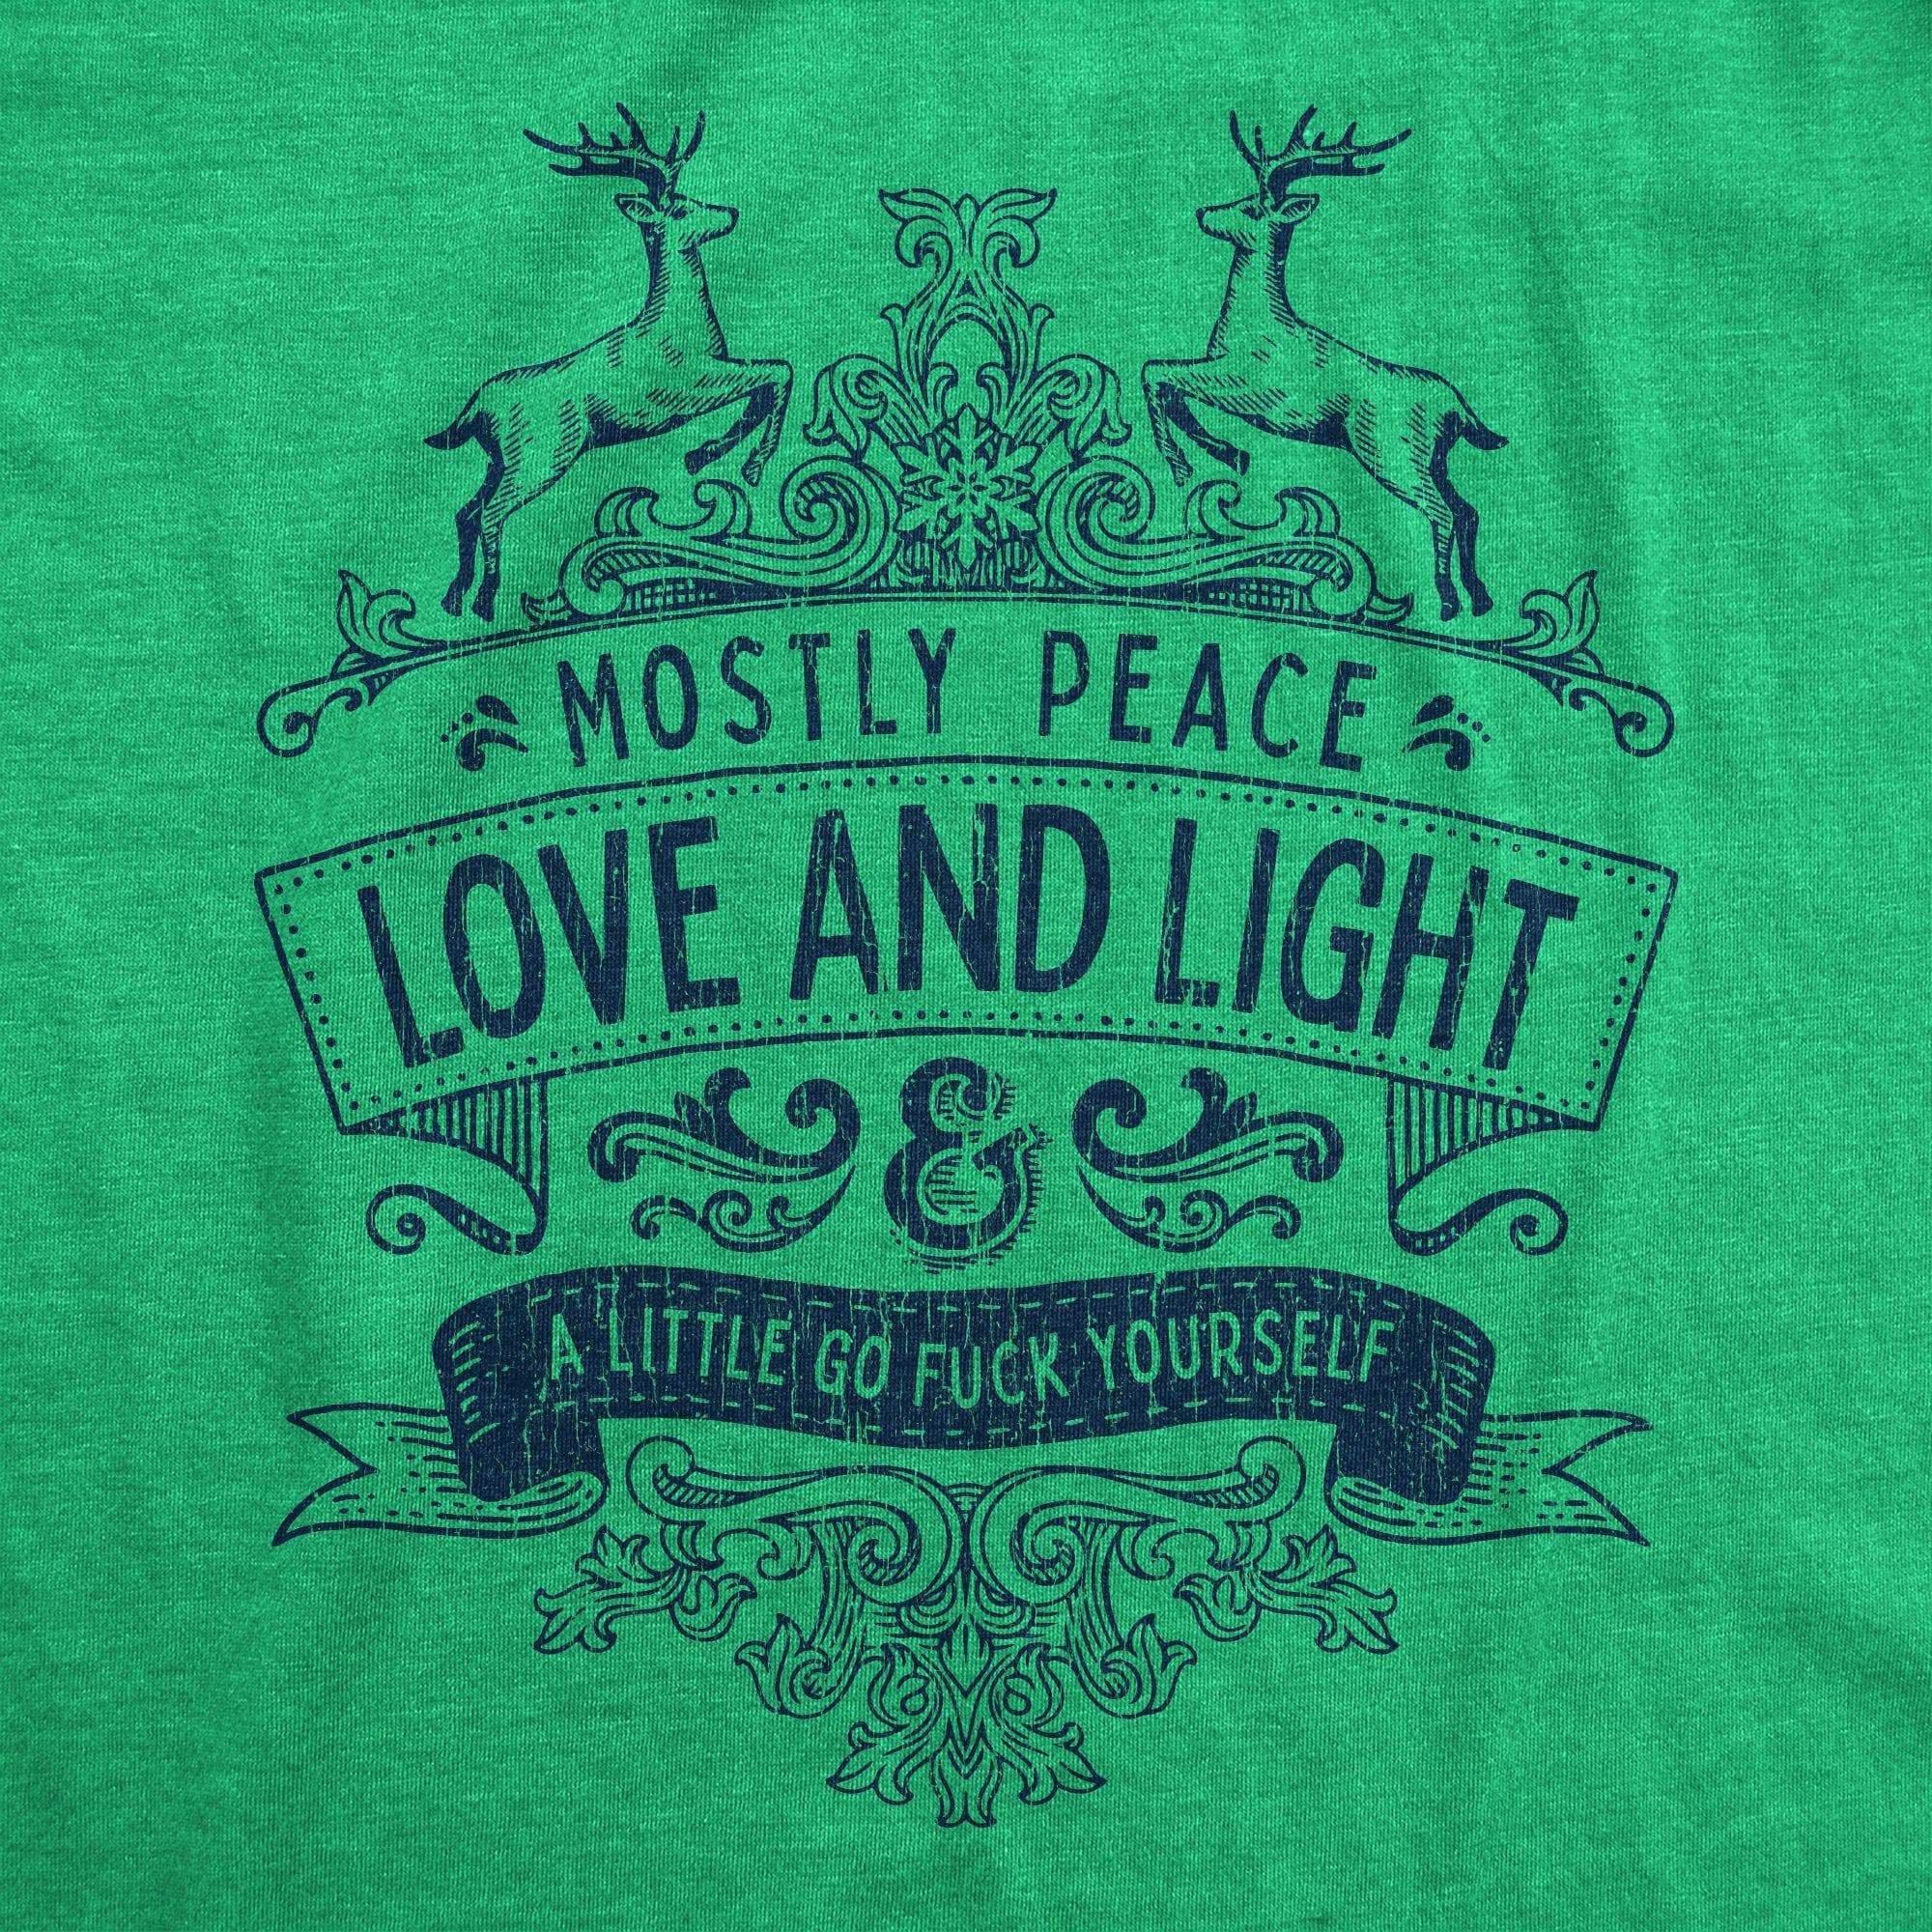 Mostly Peace Love And Light A Little Go Fuck Yourself Men's Tshirt - Crazy Dog T-Shirts